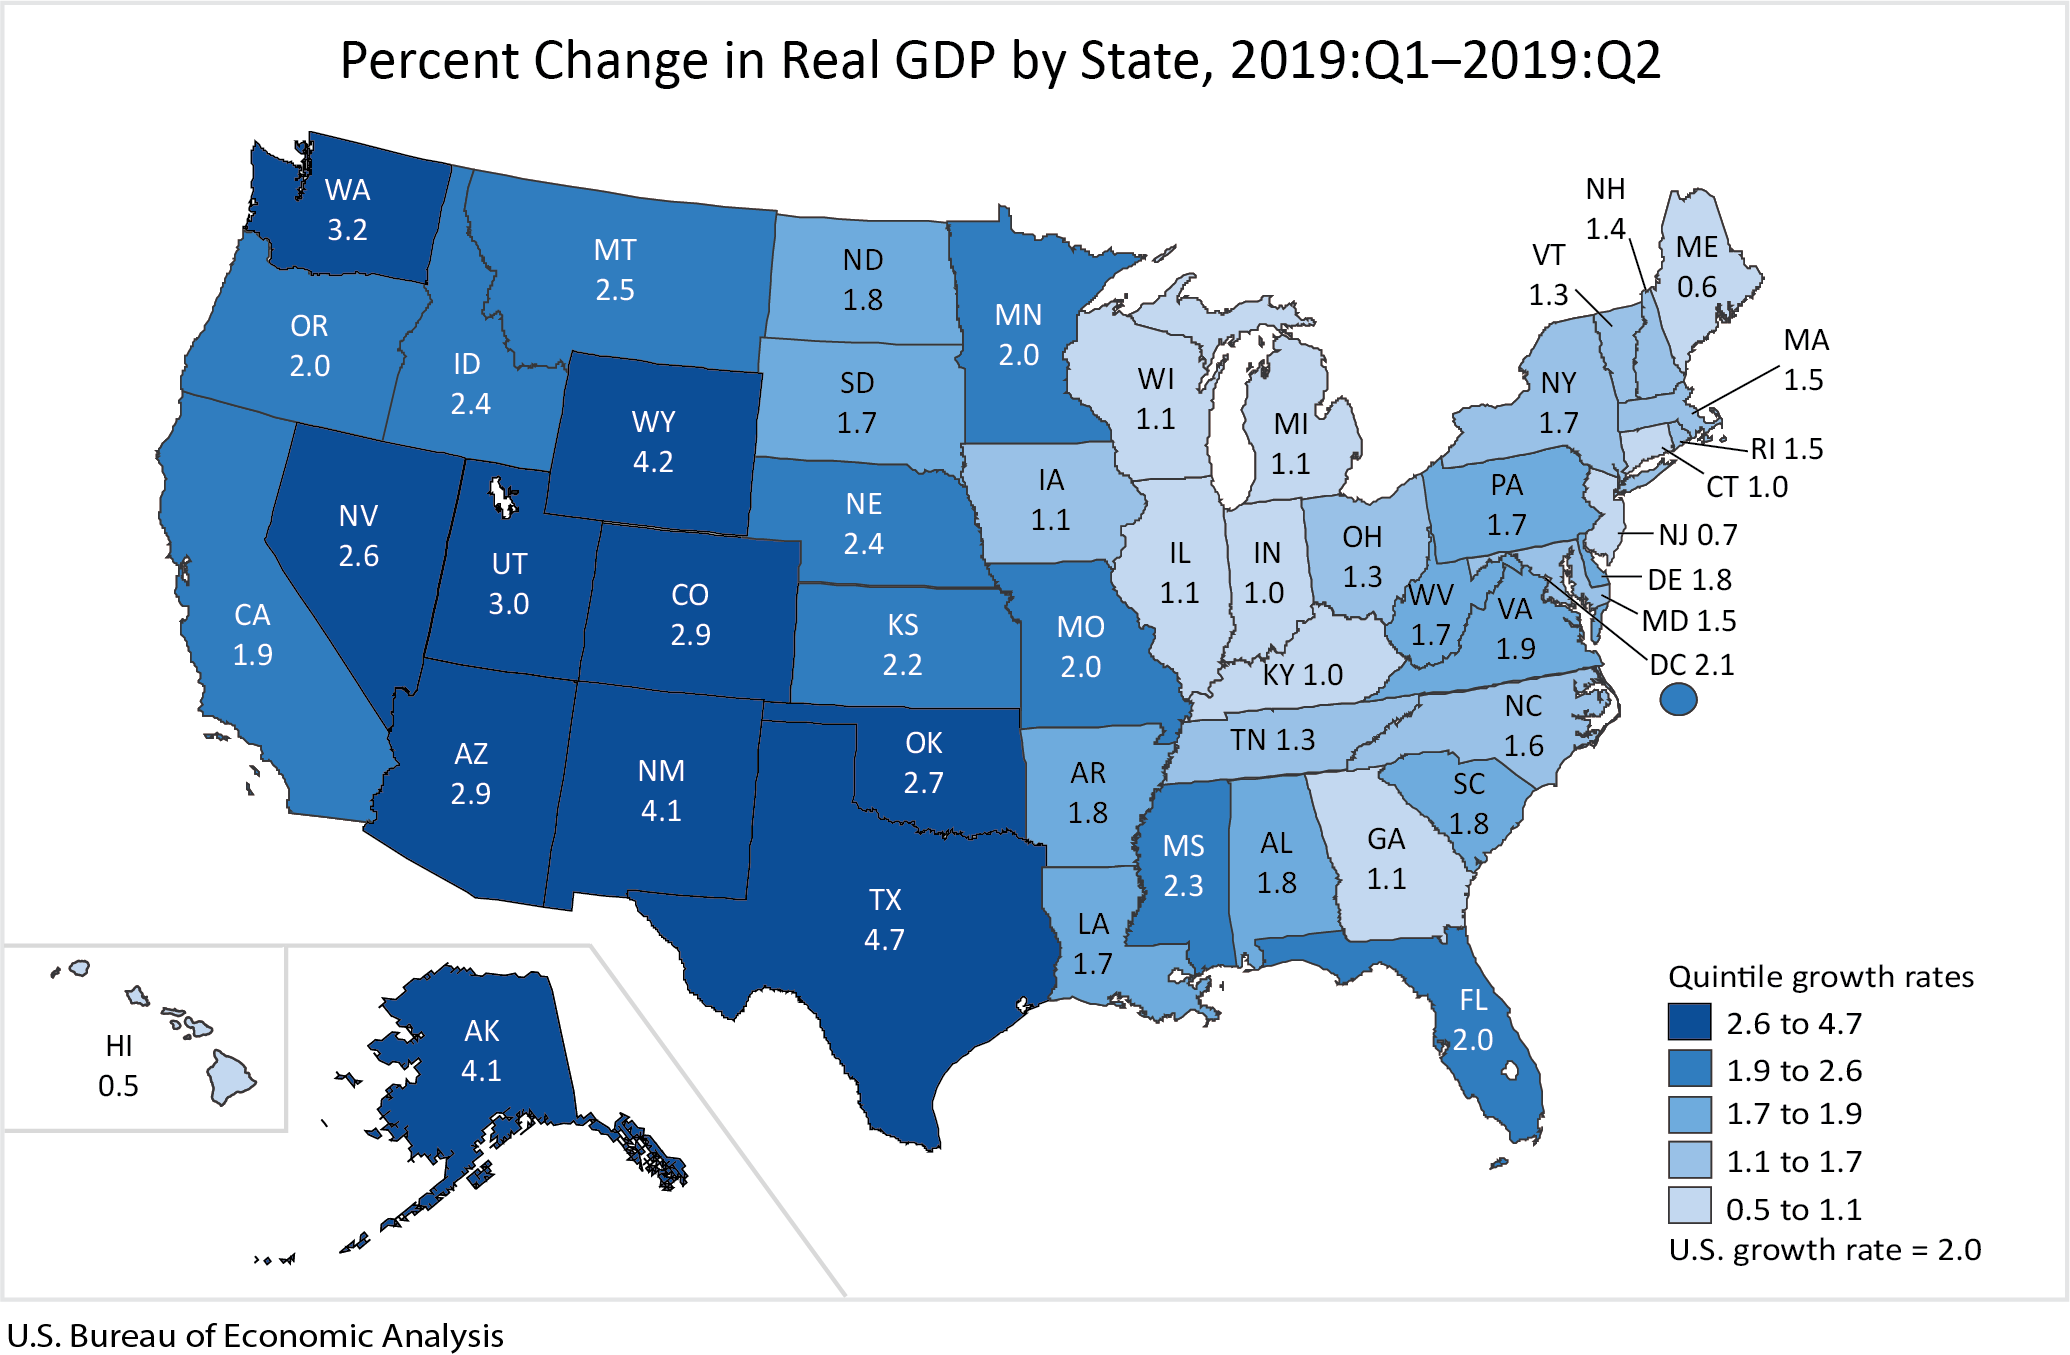 Percent Change in Real GDP by State, 2019:Q1-2019:Q2